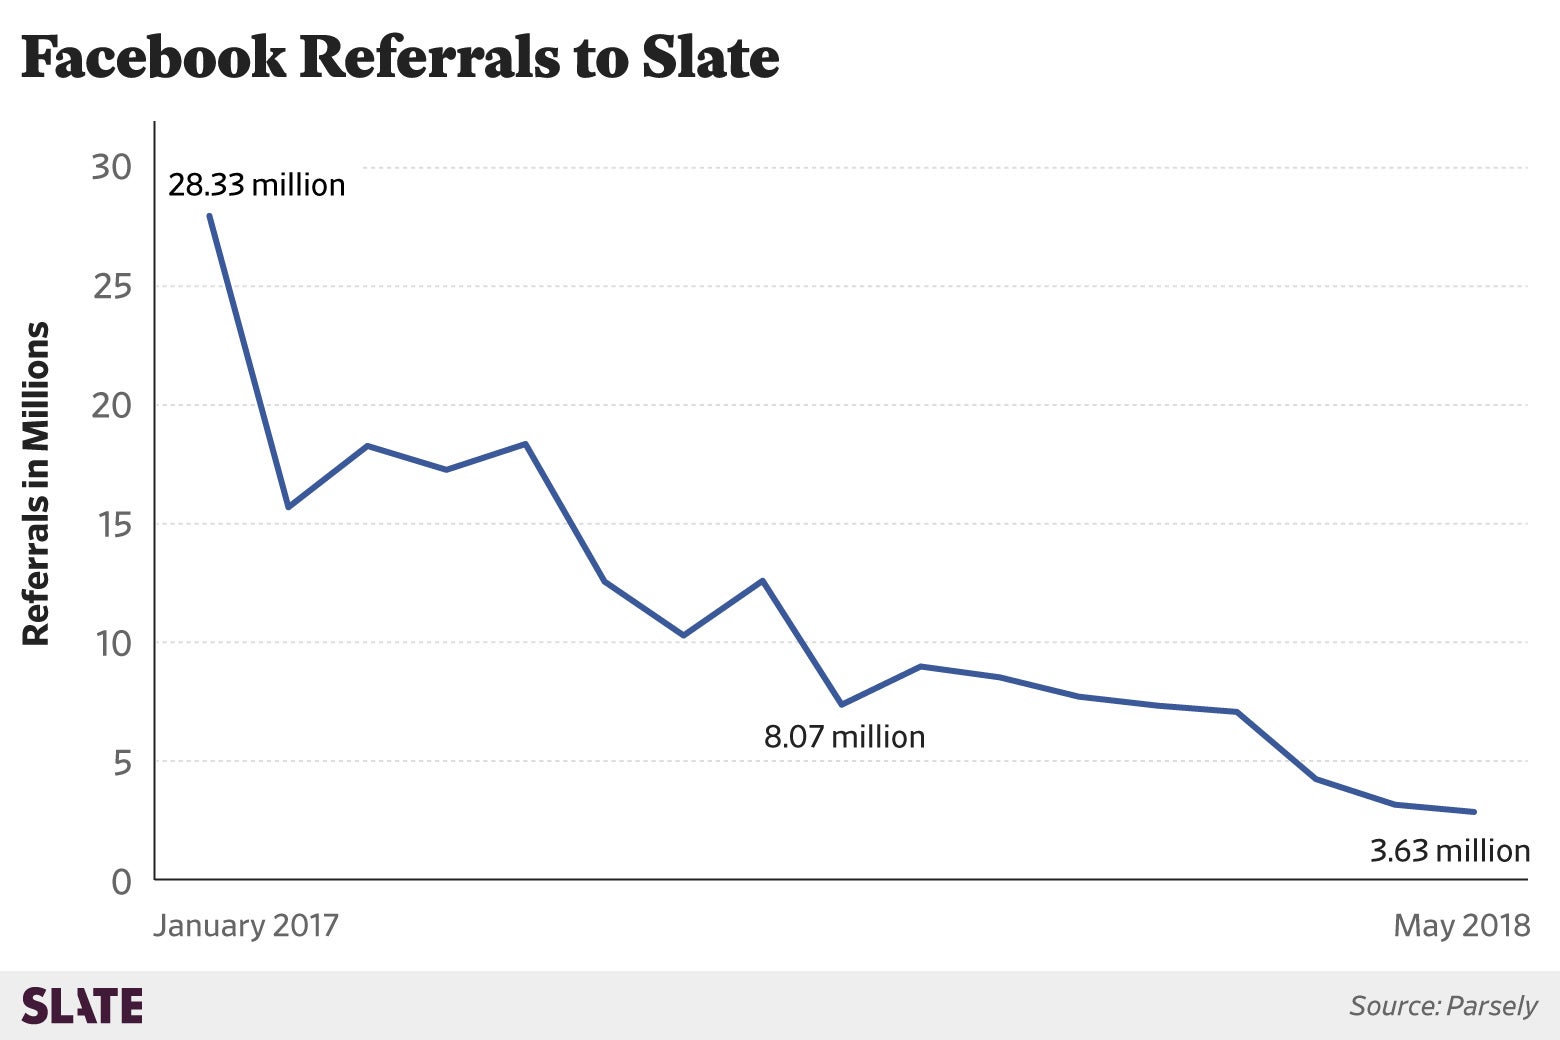 A charts shows Facebook referrals to Slate: The trend is downward from 28 million to 3.6 million.